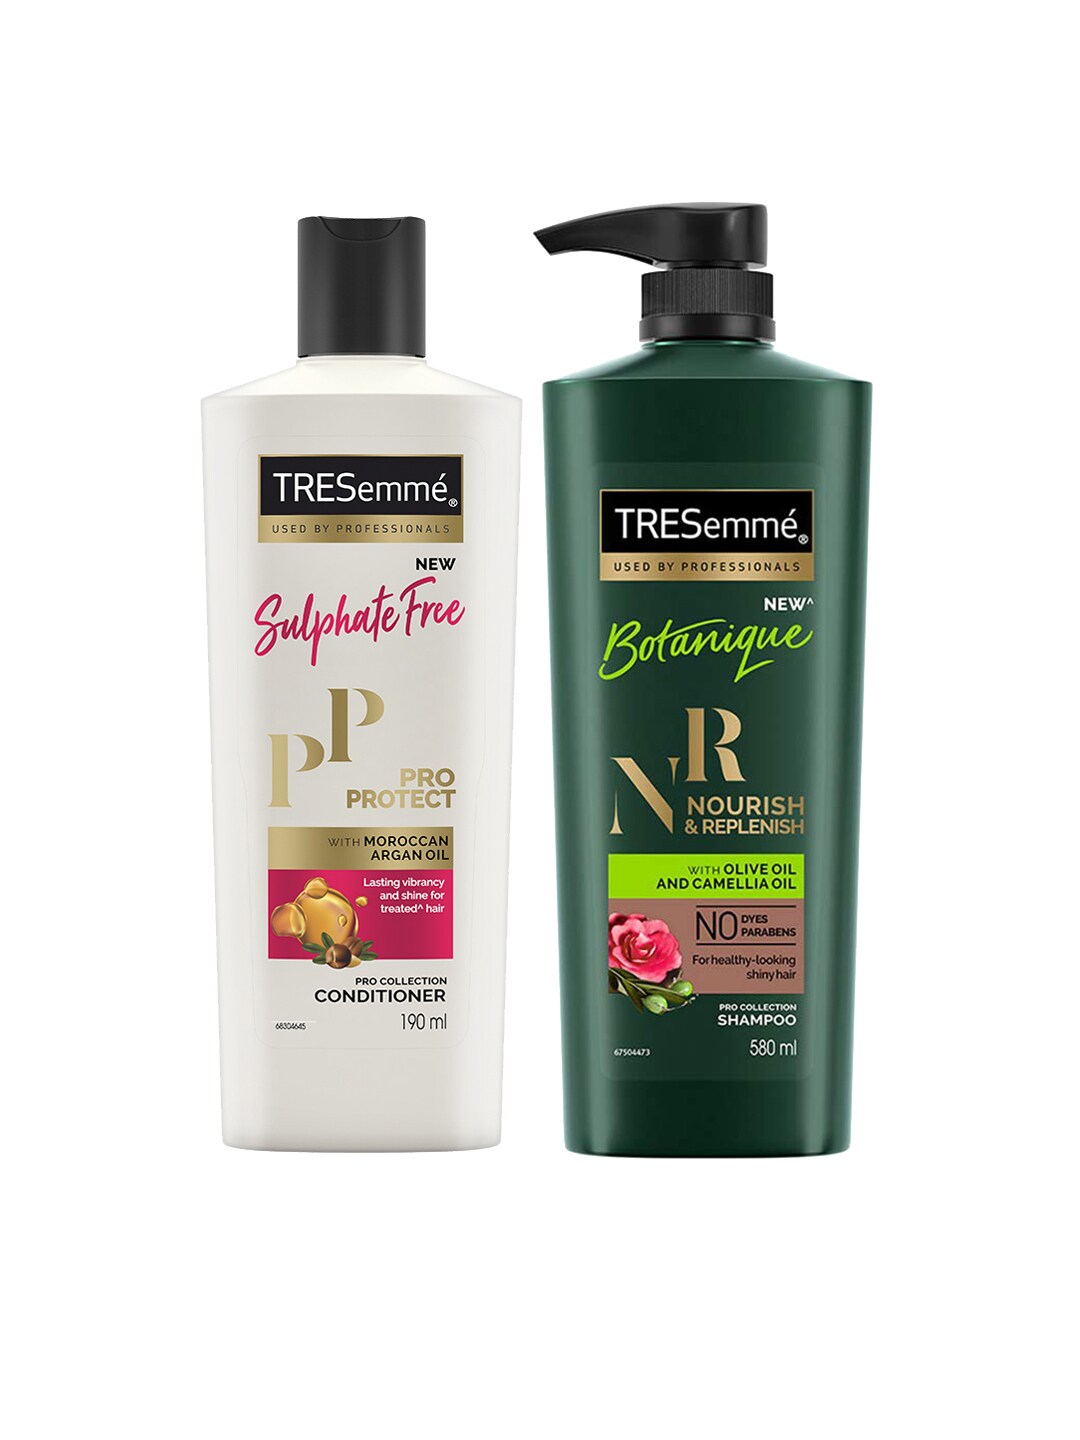 TRESemme Set of Nourish & Replenish Shampoo & Pro Protect Sulphate Free Conditioner Price in India